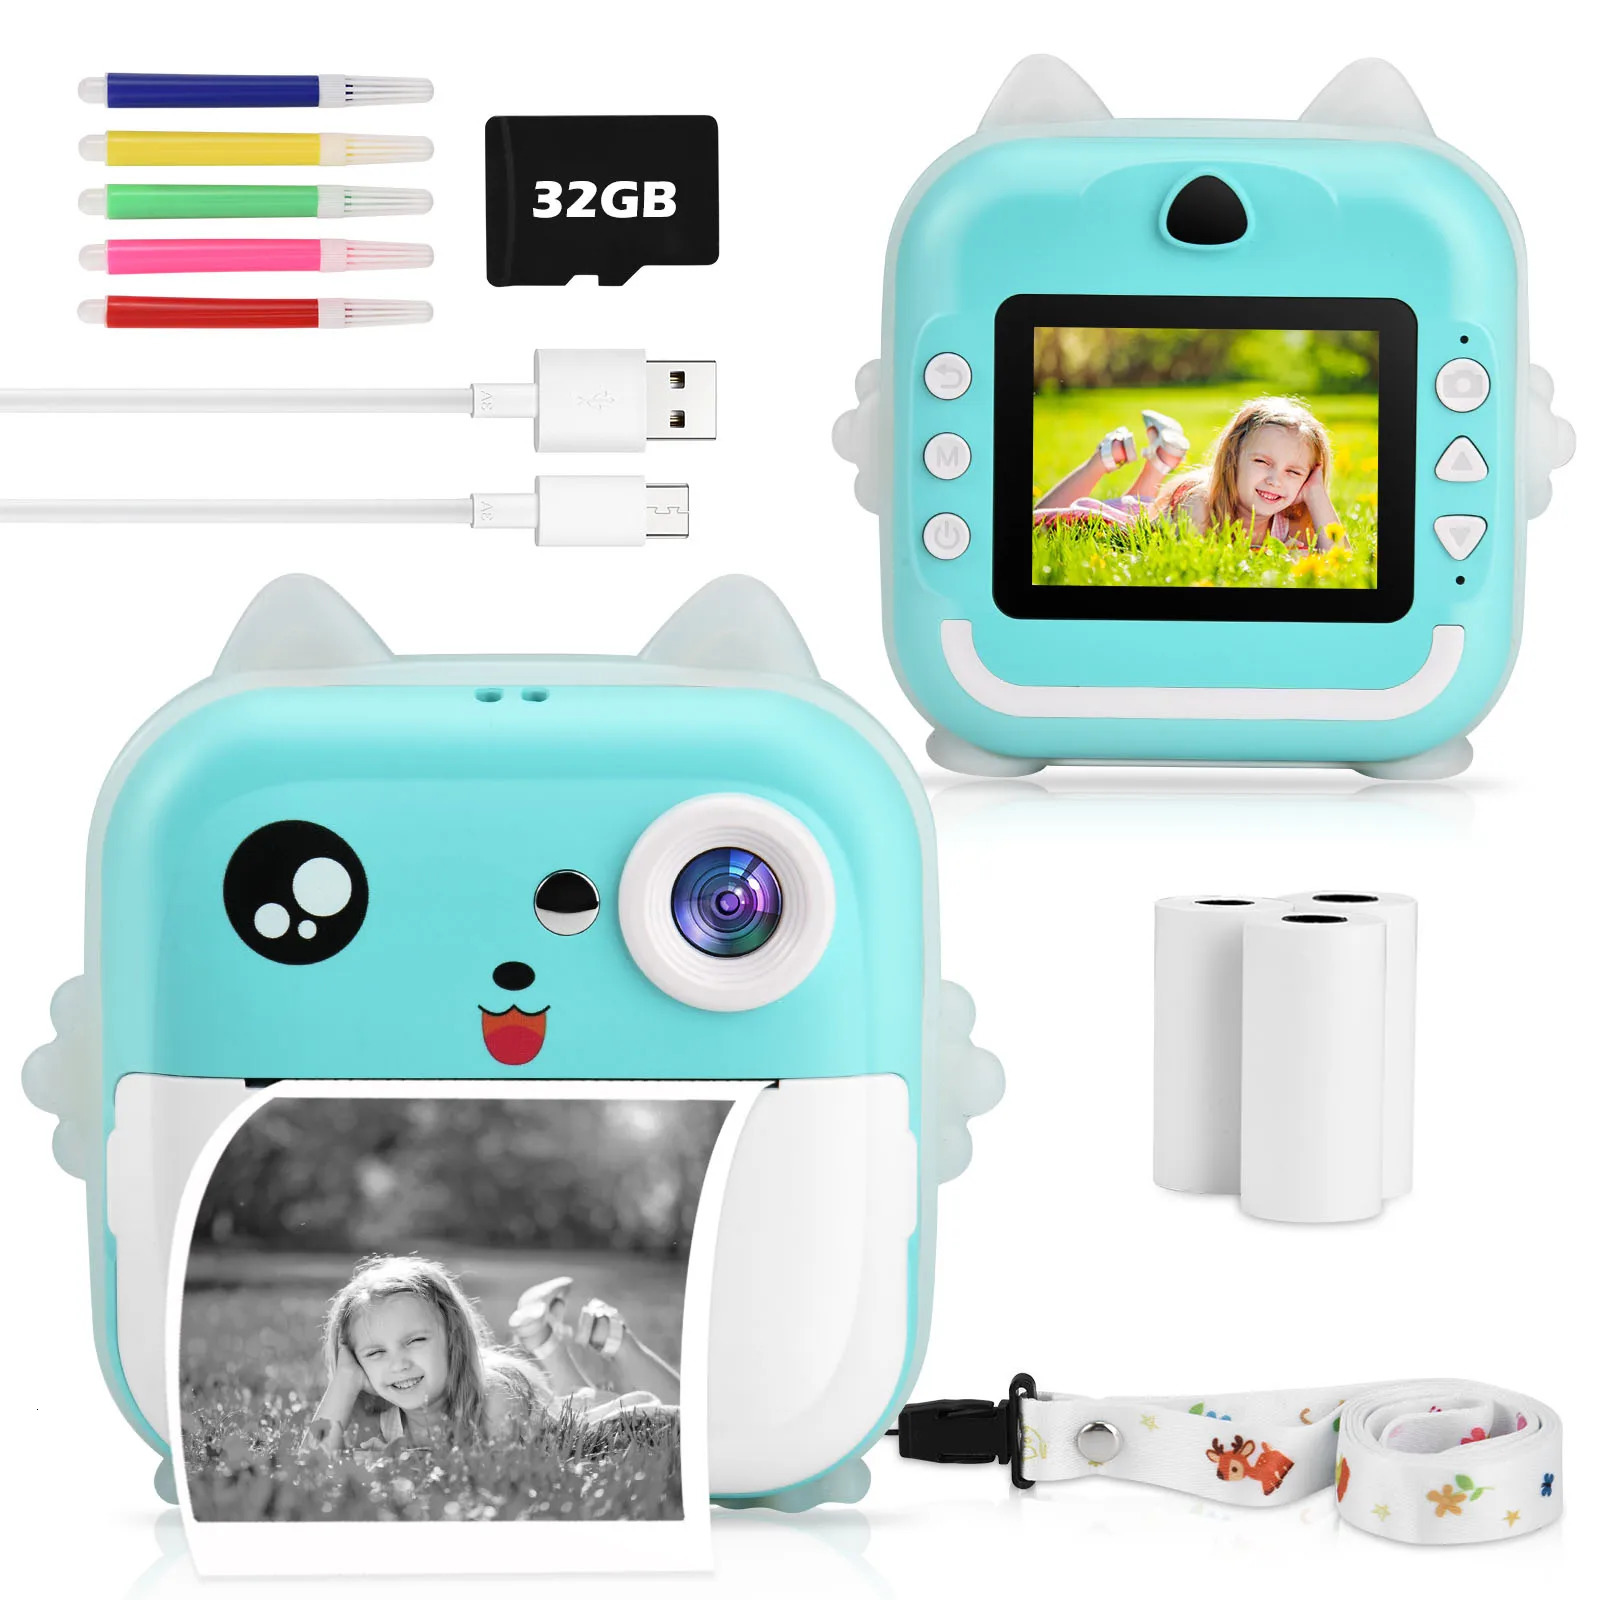 CNCBSR Childrens Instant Print Camera 1080P HD Selfie Video 32GB Child Camera For 3-14 Years Kids Toy Girls Boys Brithday Gift 240327